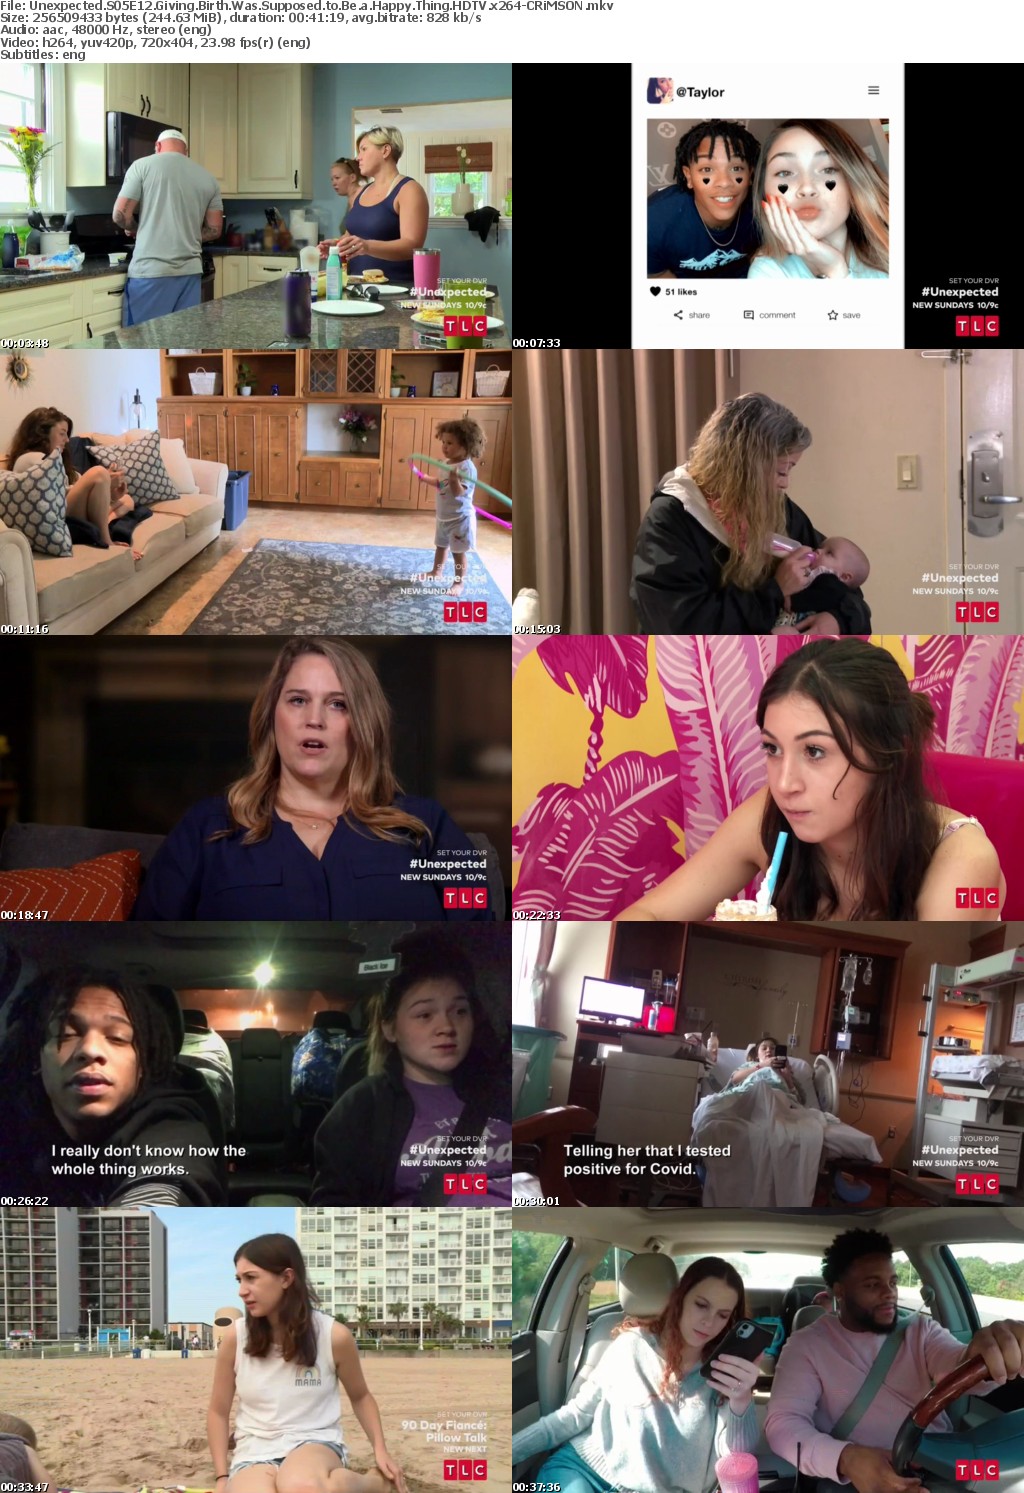 Unexpected S05E12 Giving Birth Was Supposed to Be a Happy Thing HDTV x264-CRiMSON